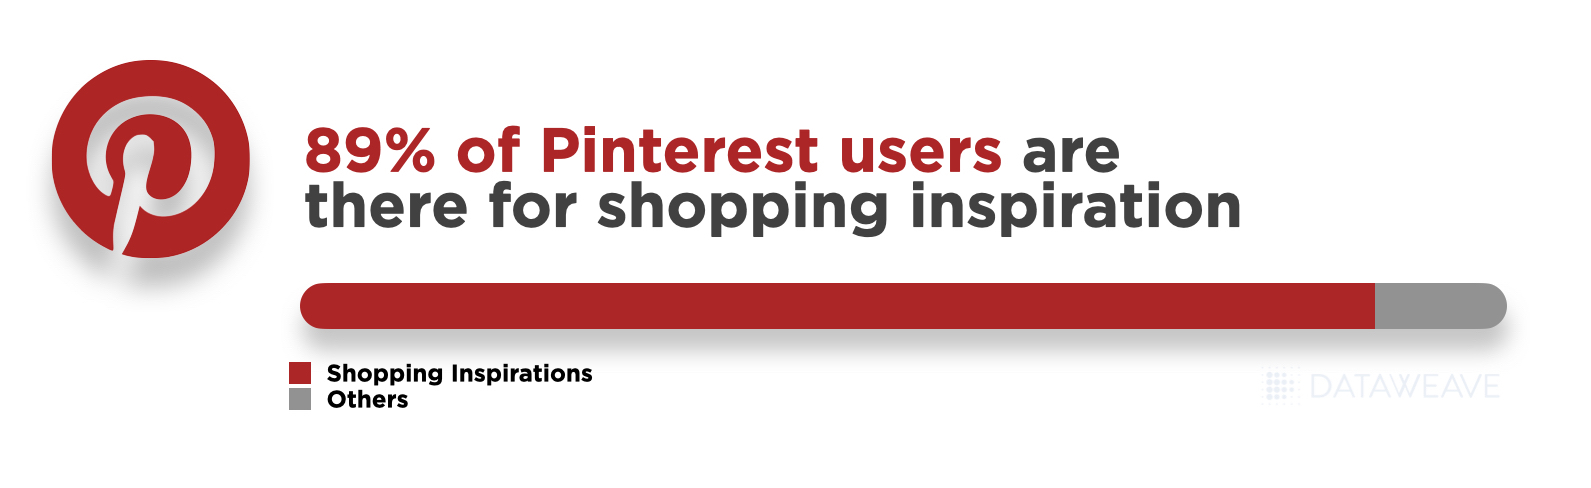 Pinterest users are there for Shopping Inspiration